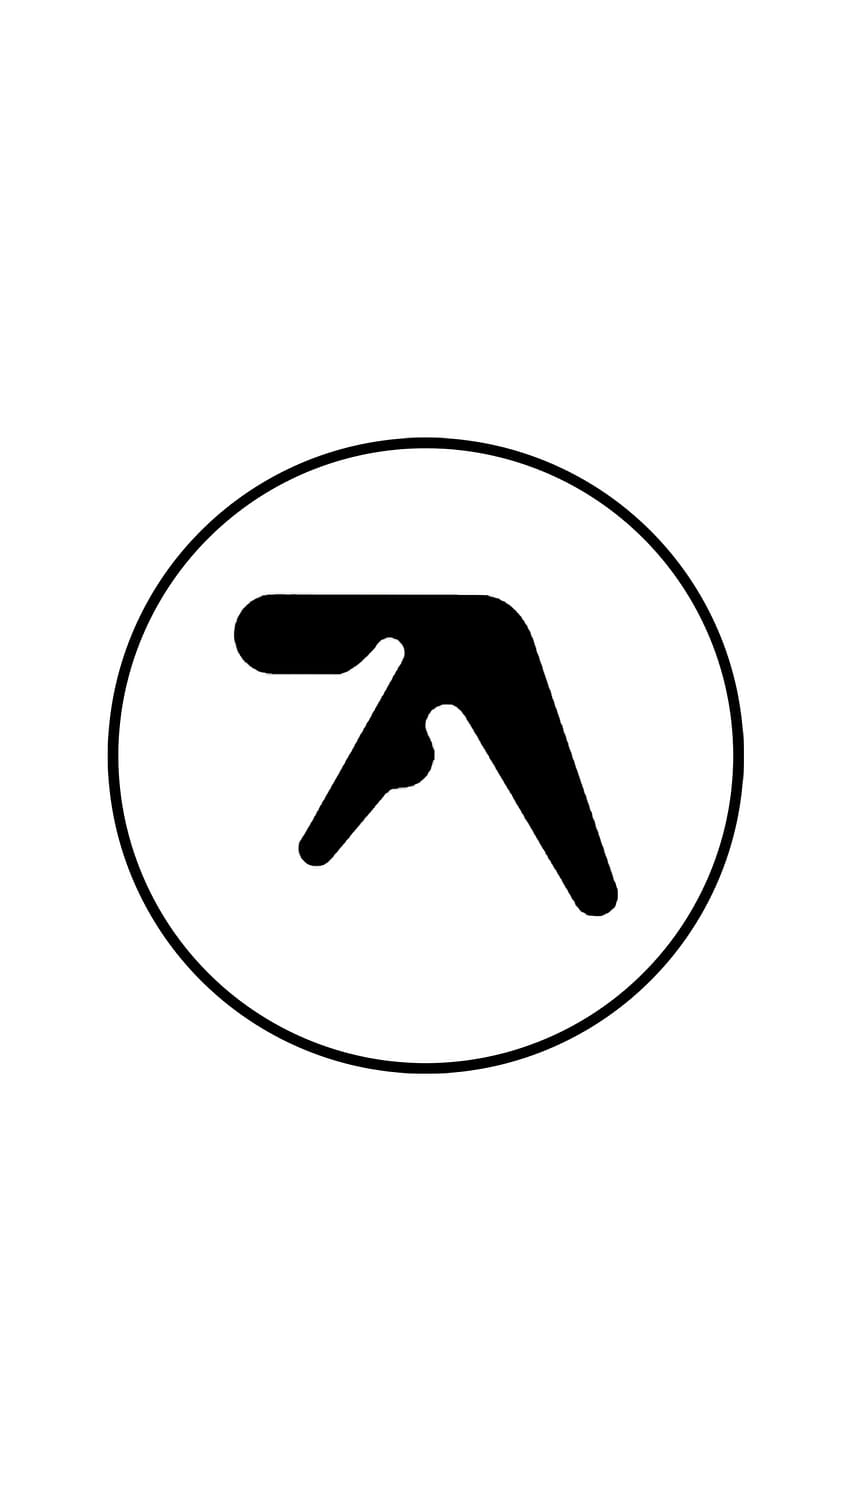 A very simple, 16:9 phone : aphextwin, aphex twin HD phone wallpaper